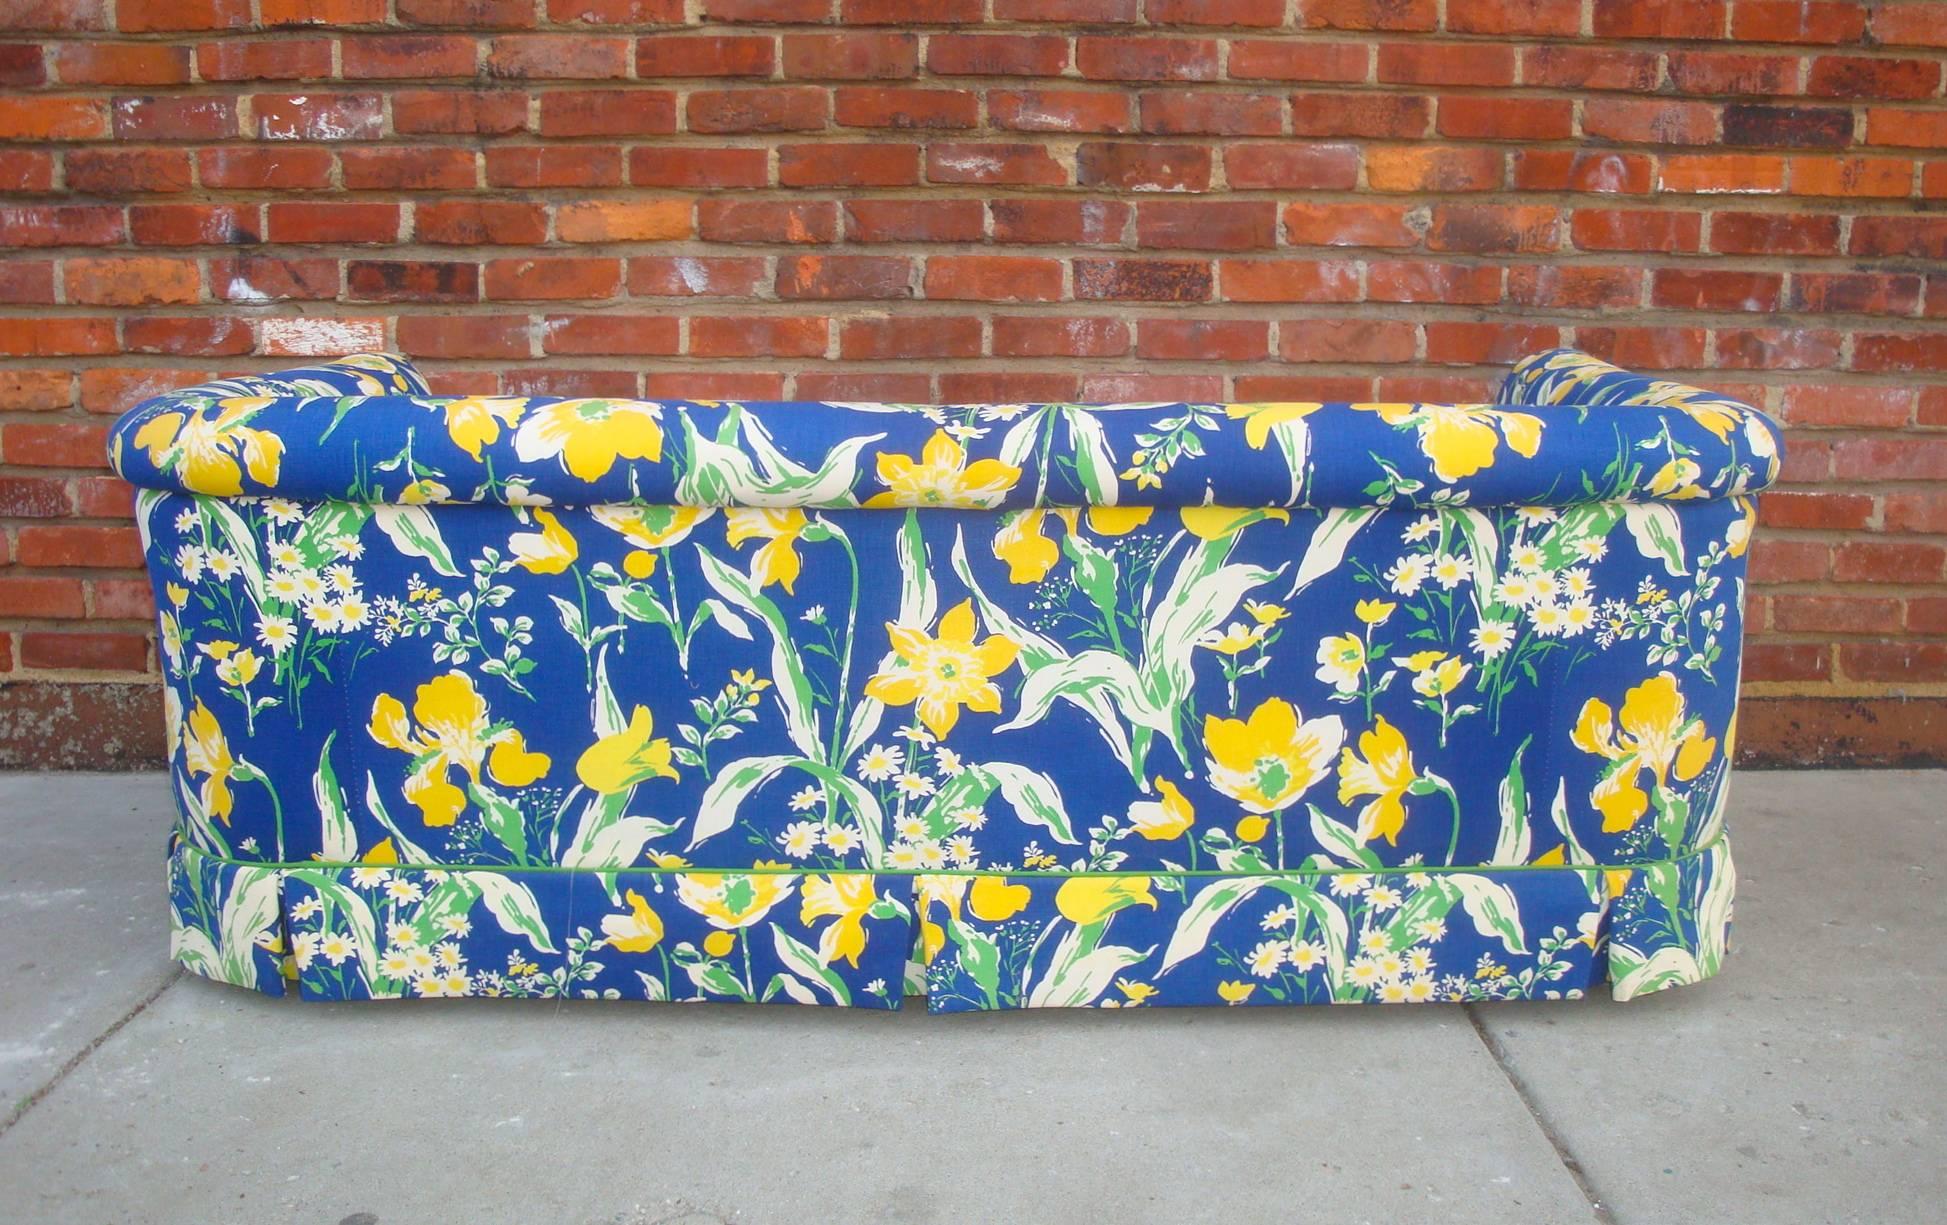 20th Century 1970s Blue and Yellow Floral Motif Sofa by Highland House of Hickory